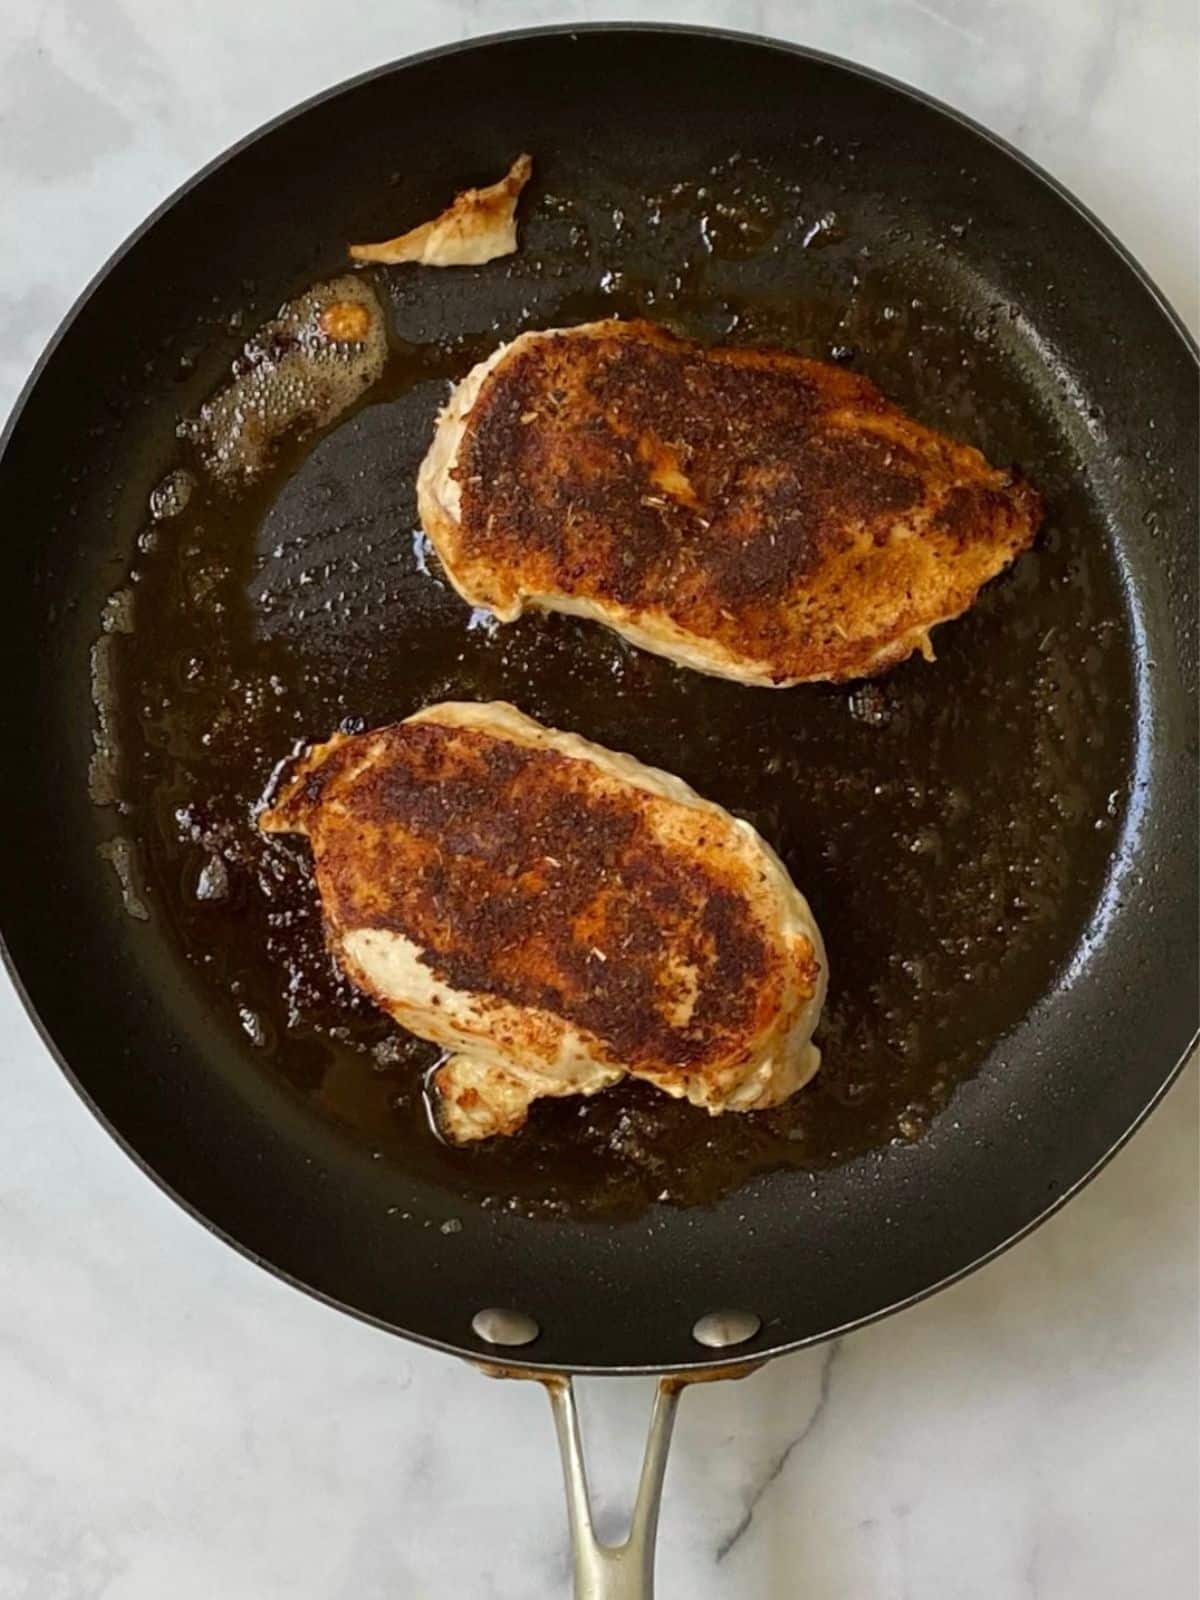 searing the chicken in a skillet.